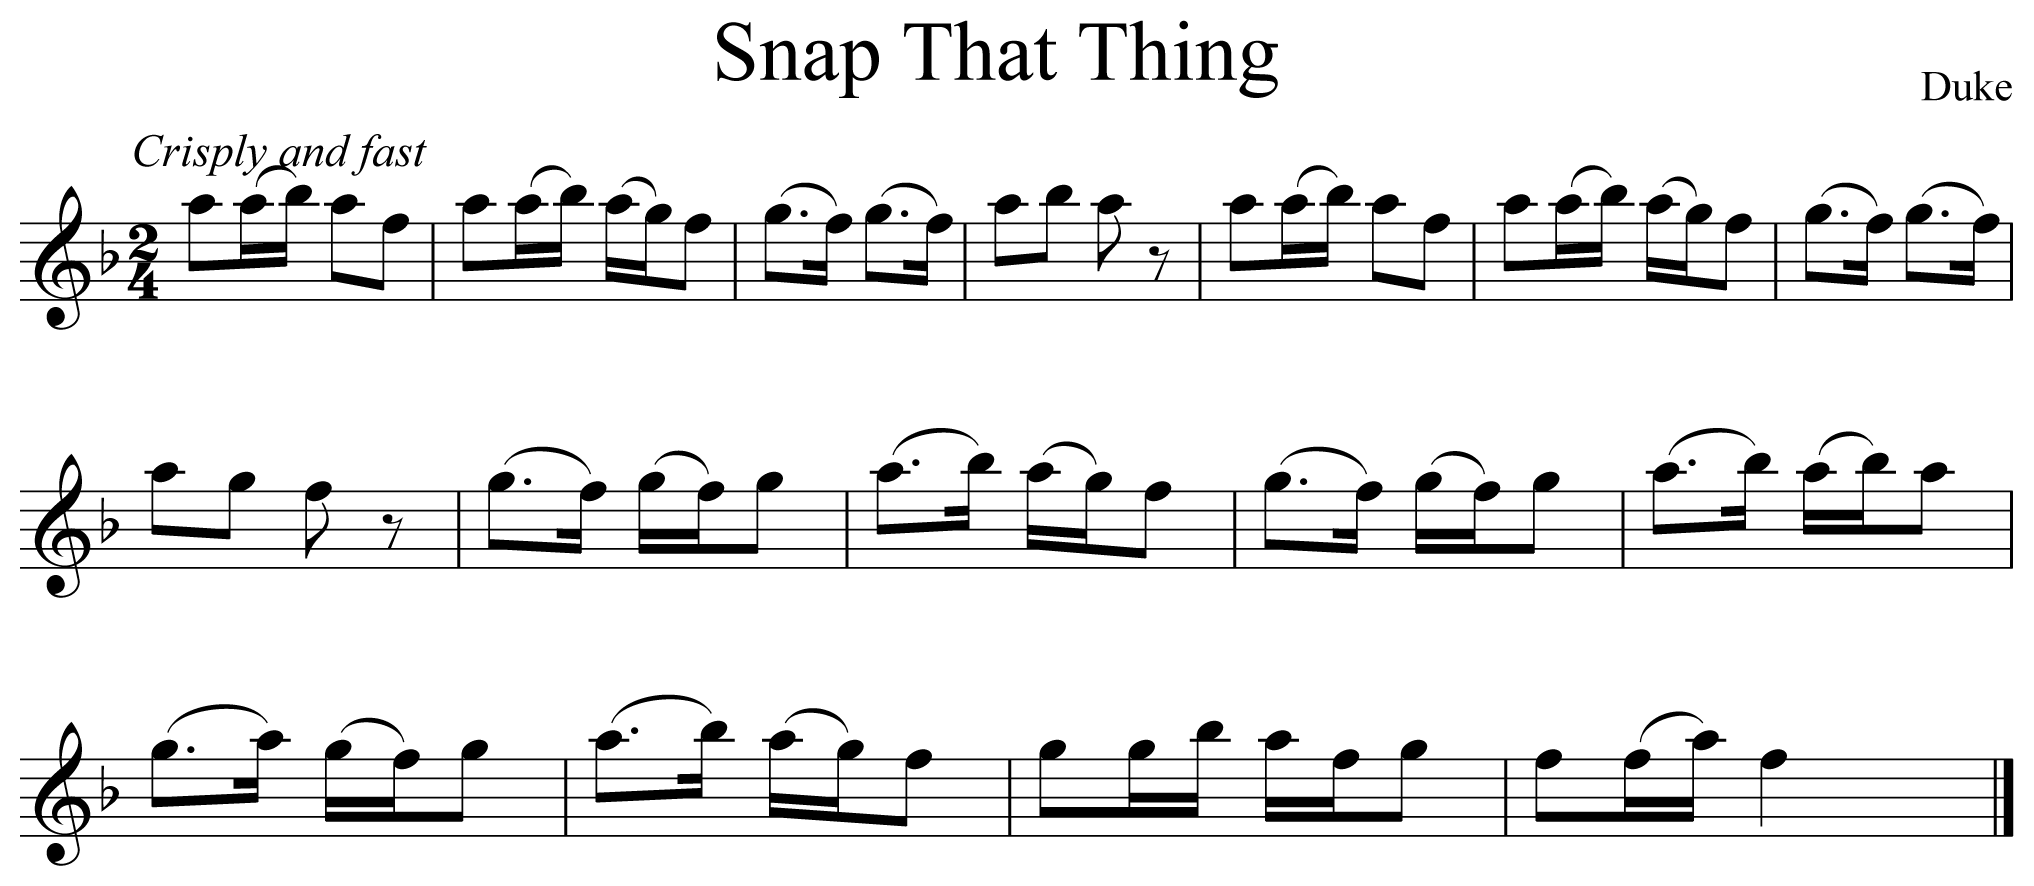 Snap That Thing Notation Flute